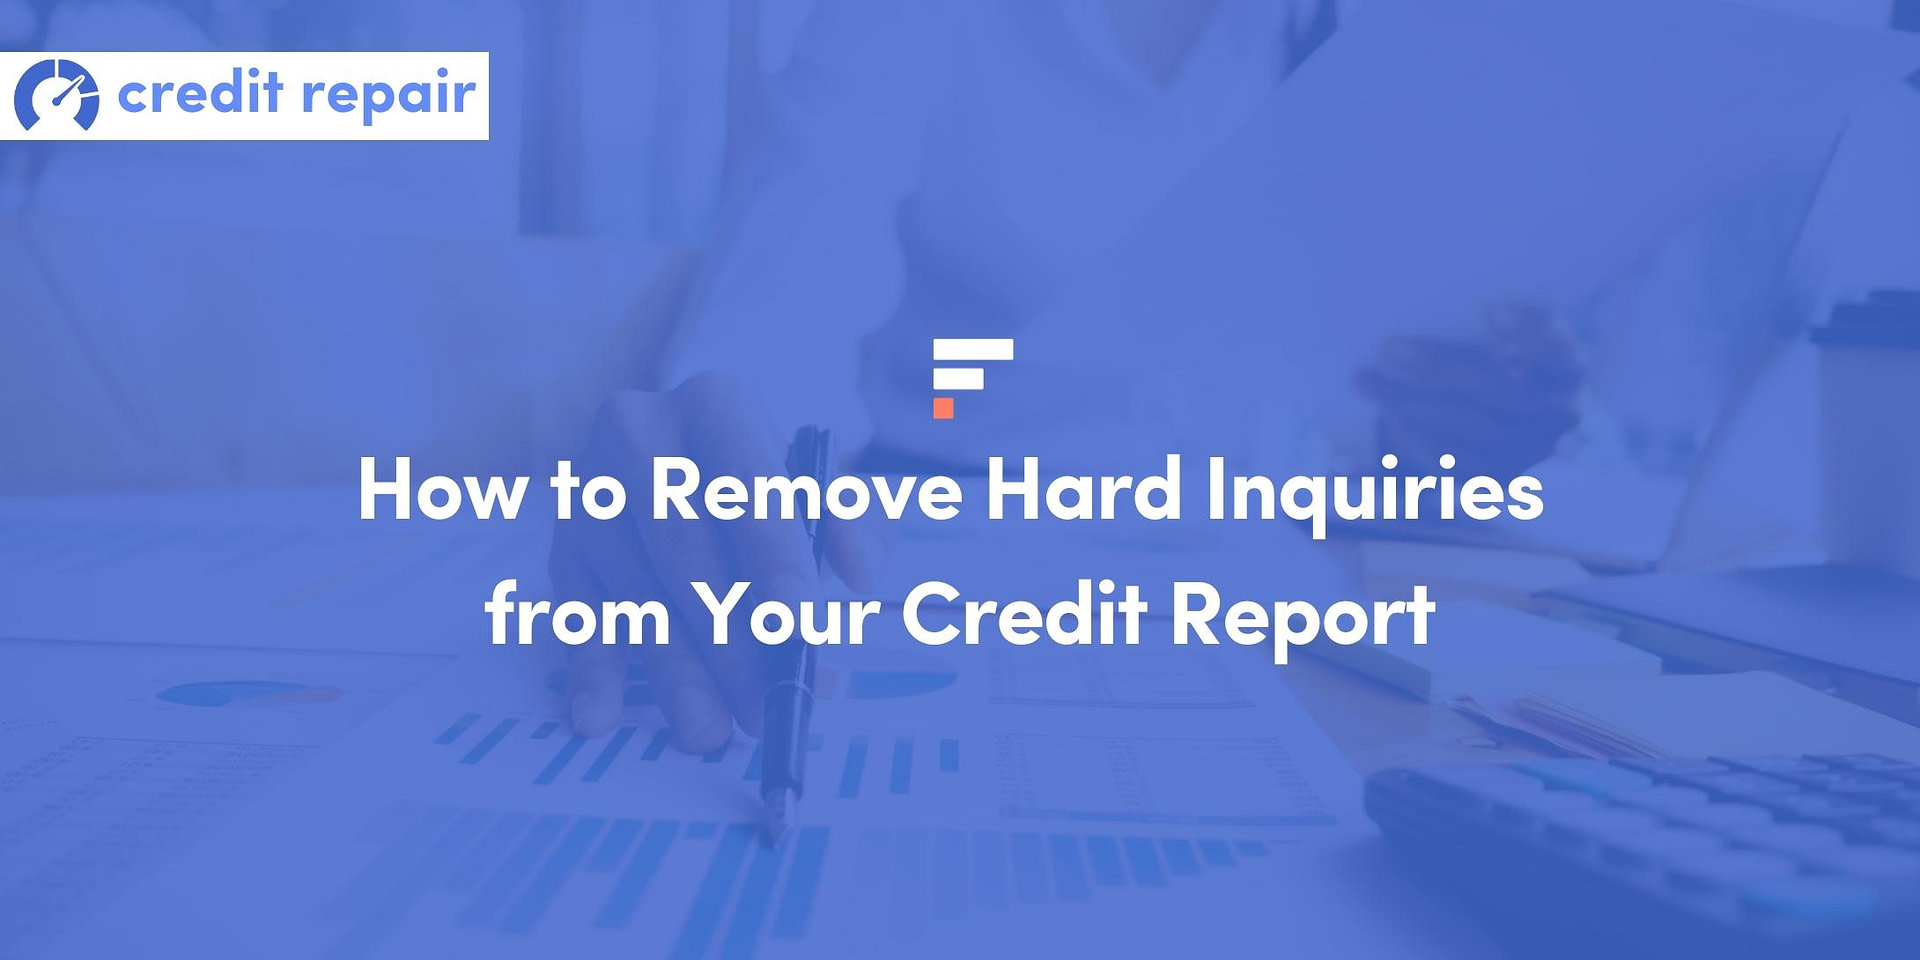 3 Easy Steps to Remove Hard Inquiries from Your Credit Report